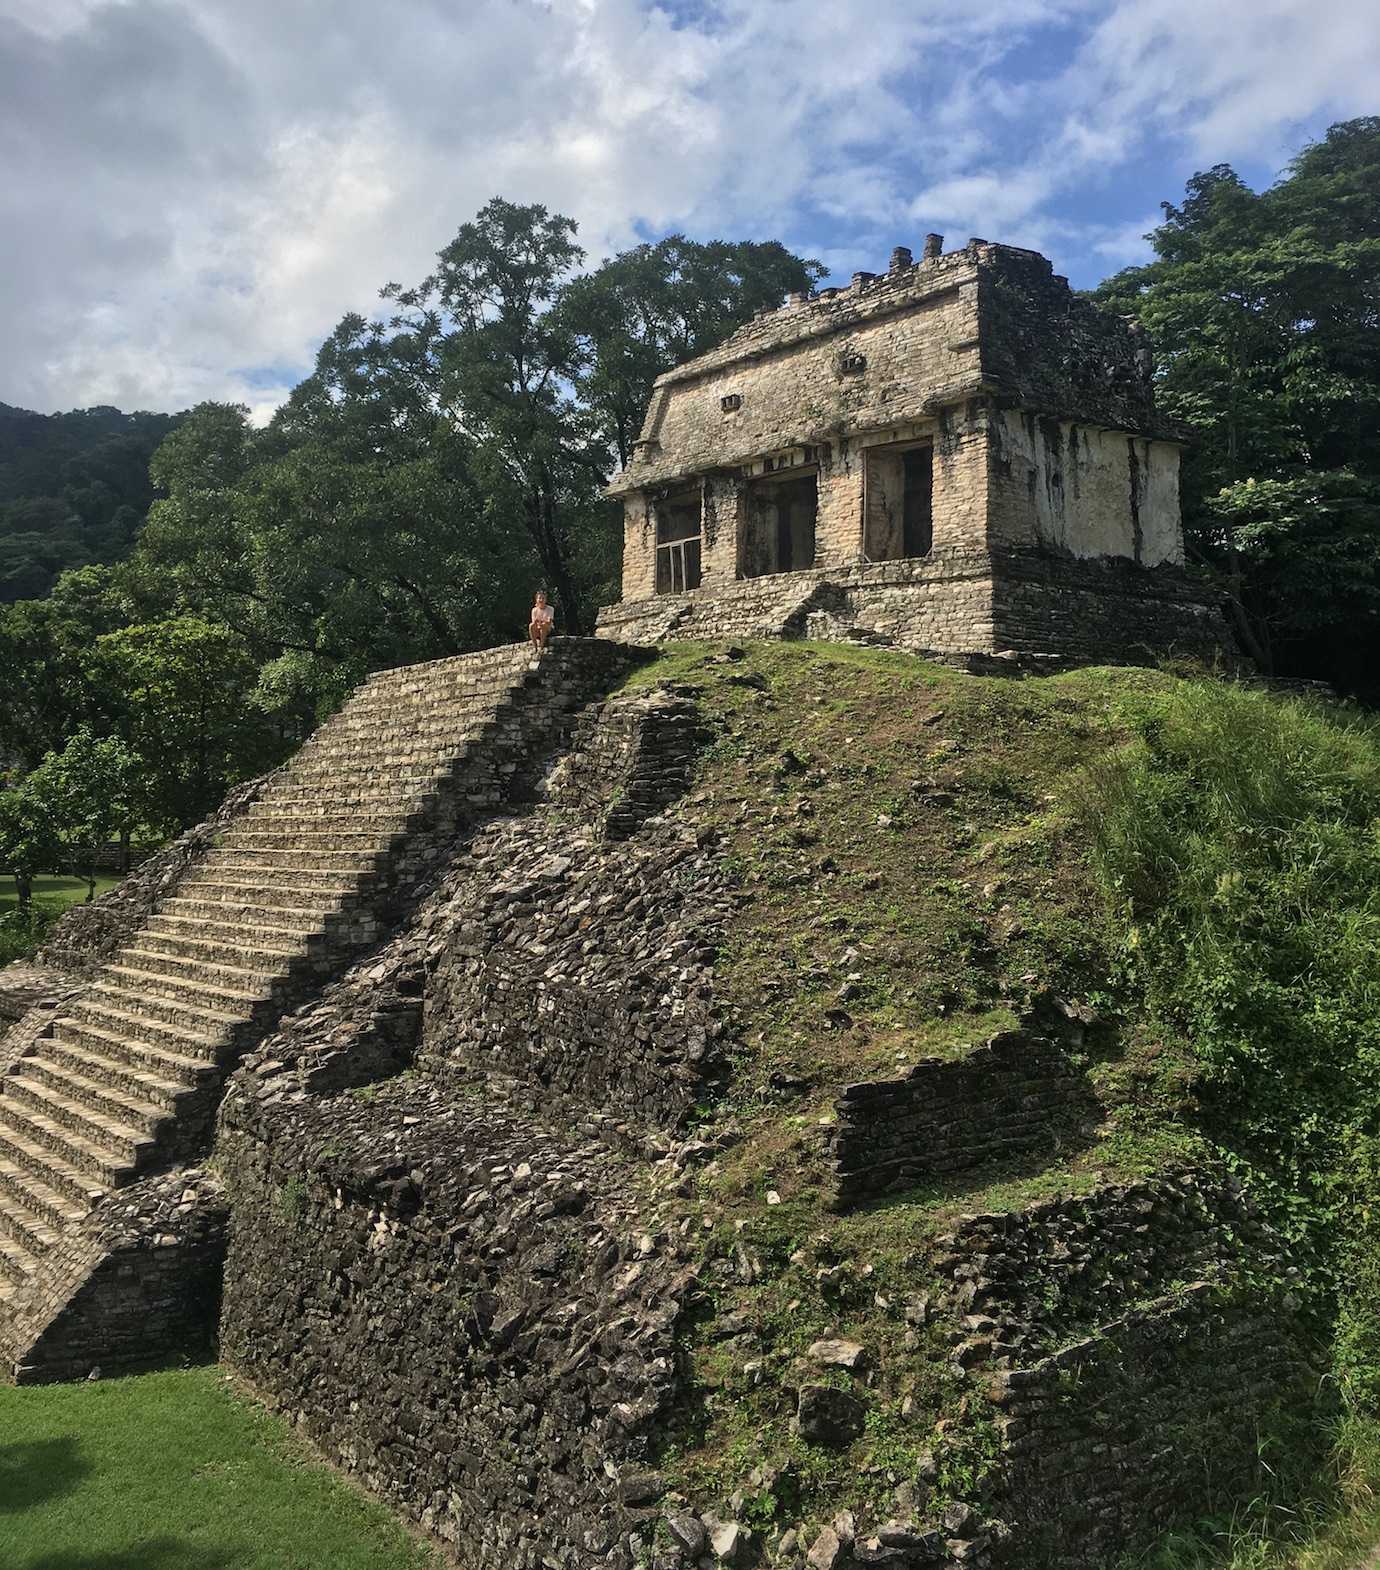 Palenque - Ruins and Waterfalls - The Travelling Triplet